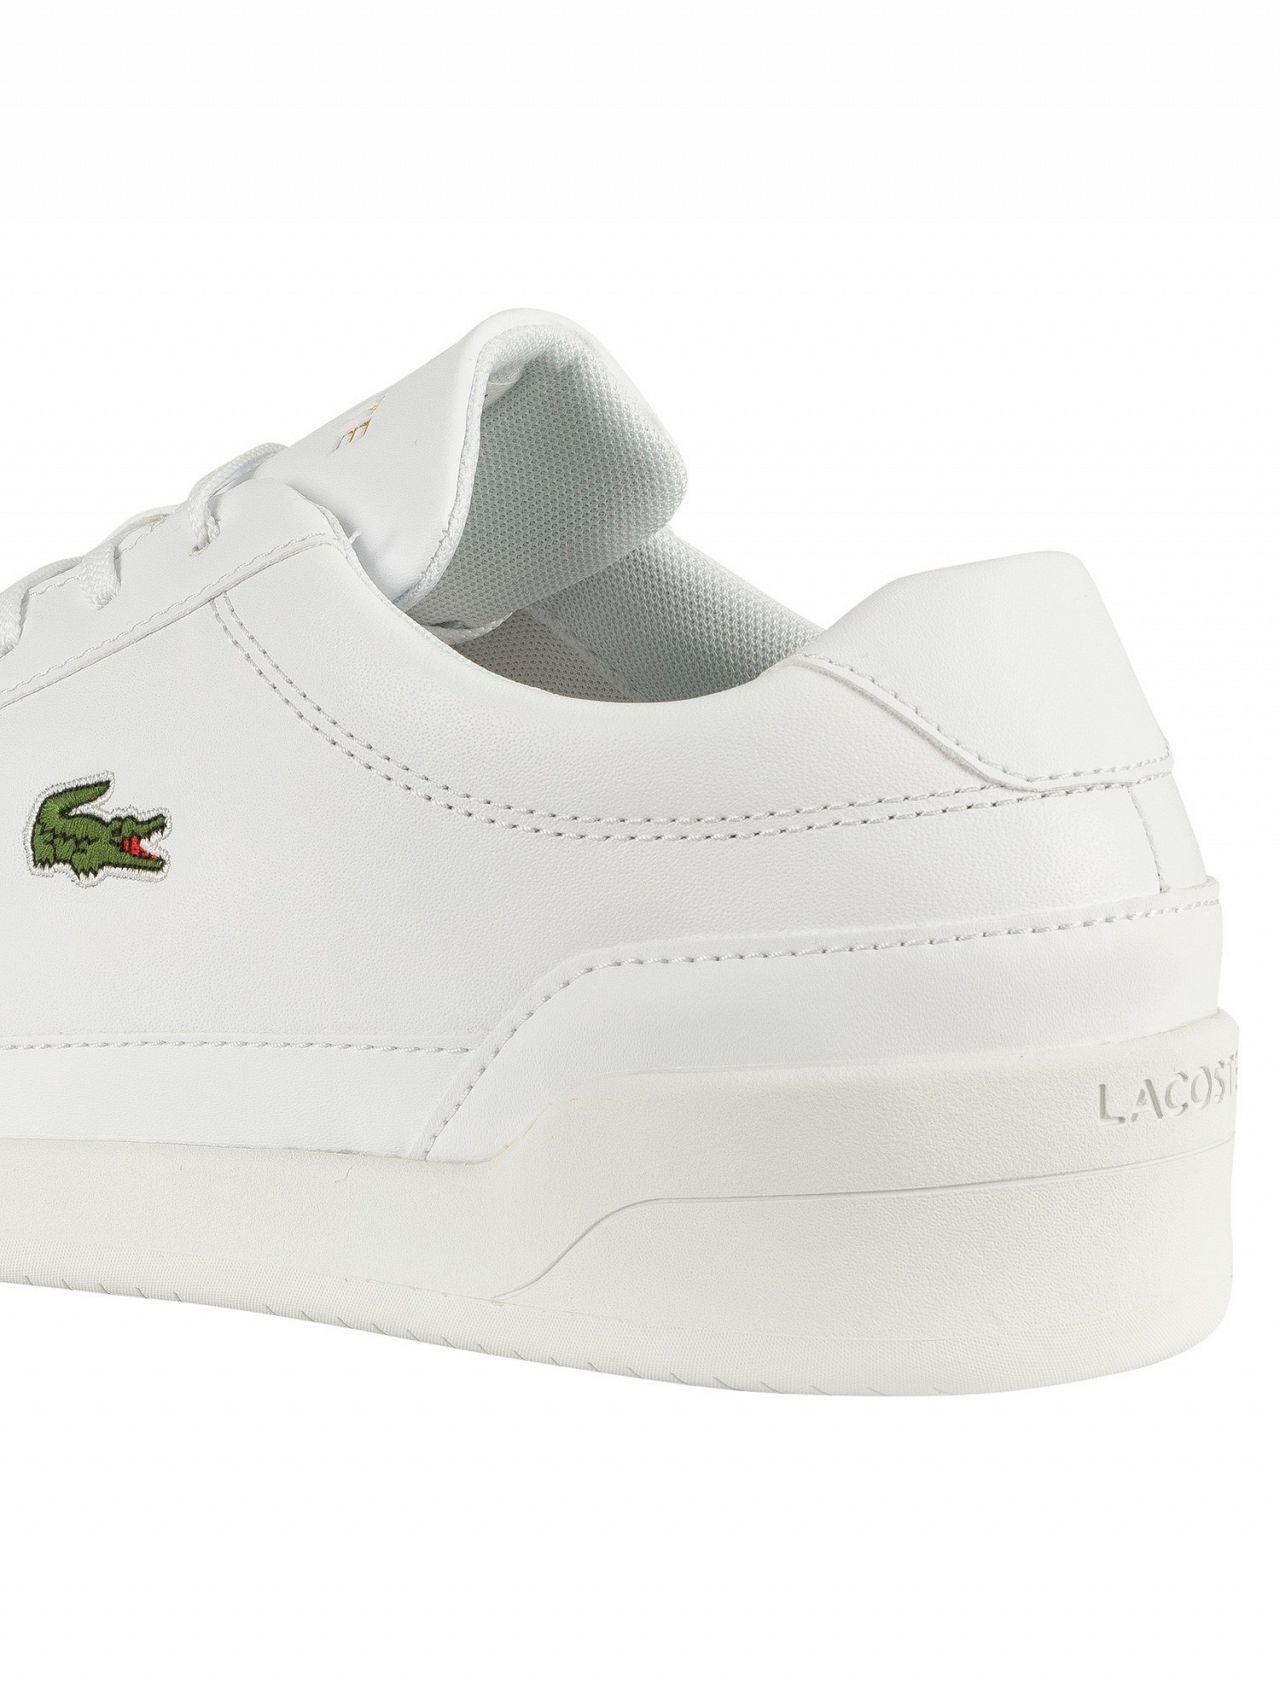 lacoste challenge trainers - 52% OFF 